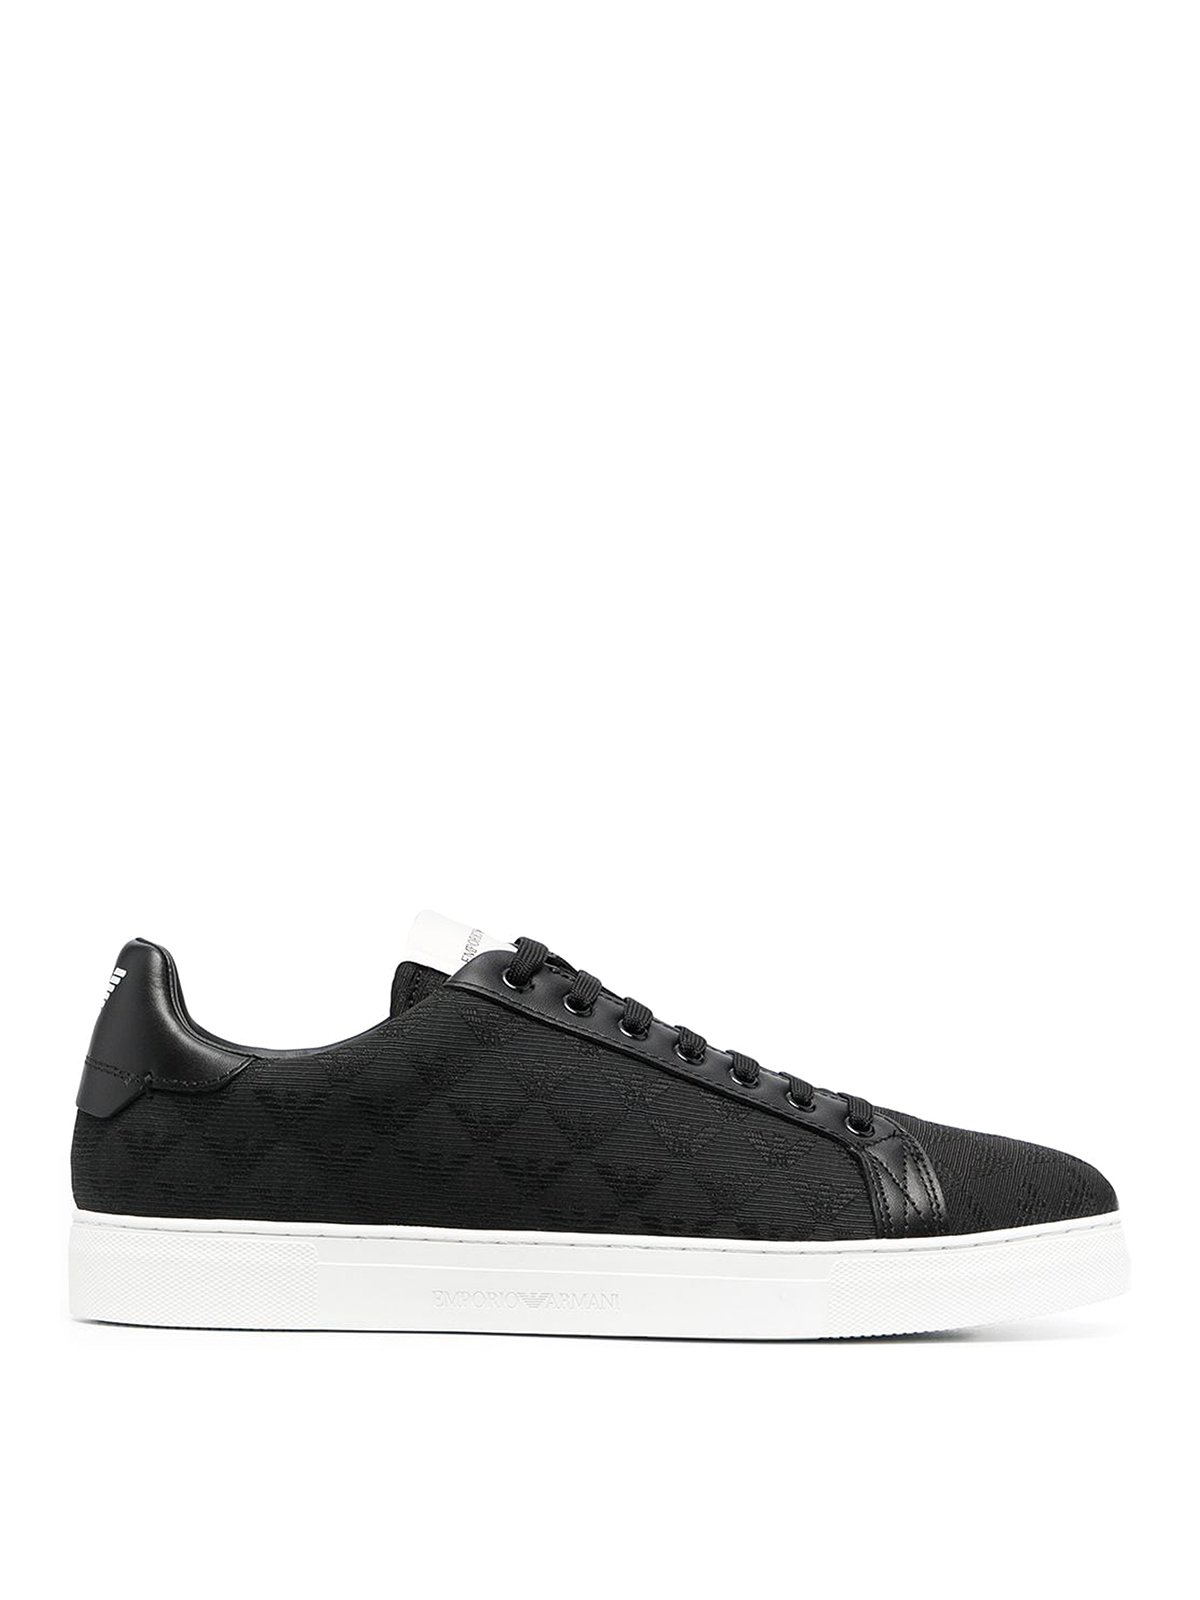 Emporio Armani Black Quilted Low-top Sneakers